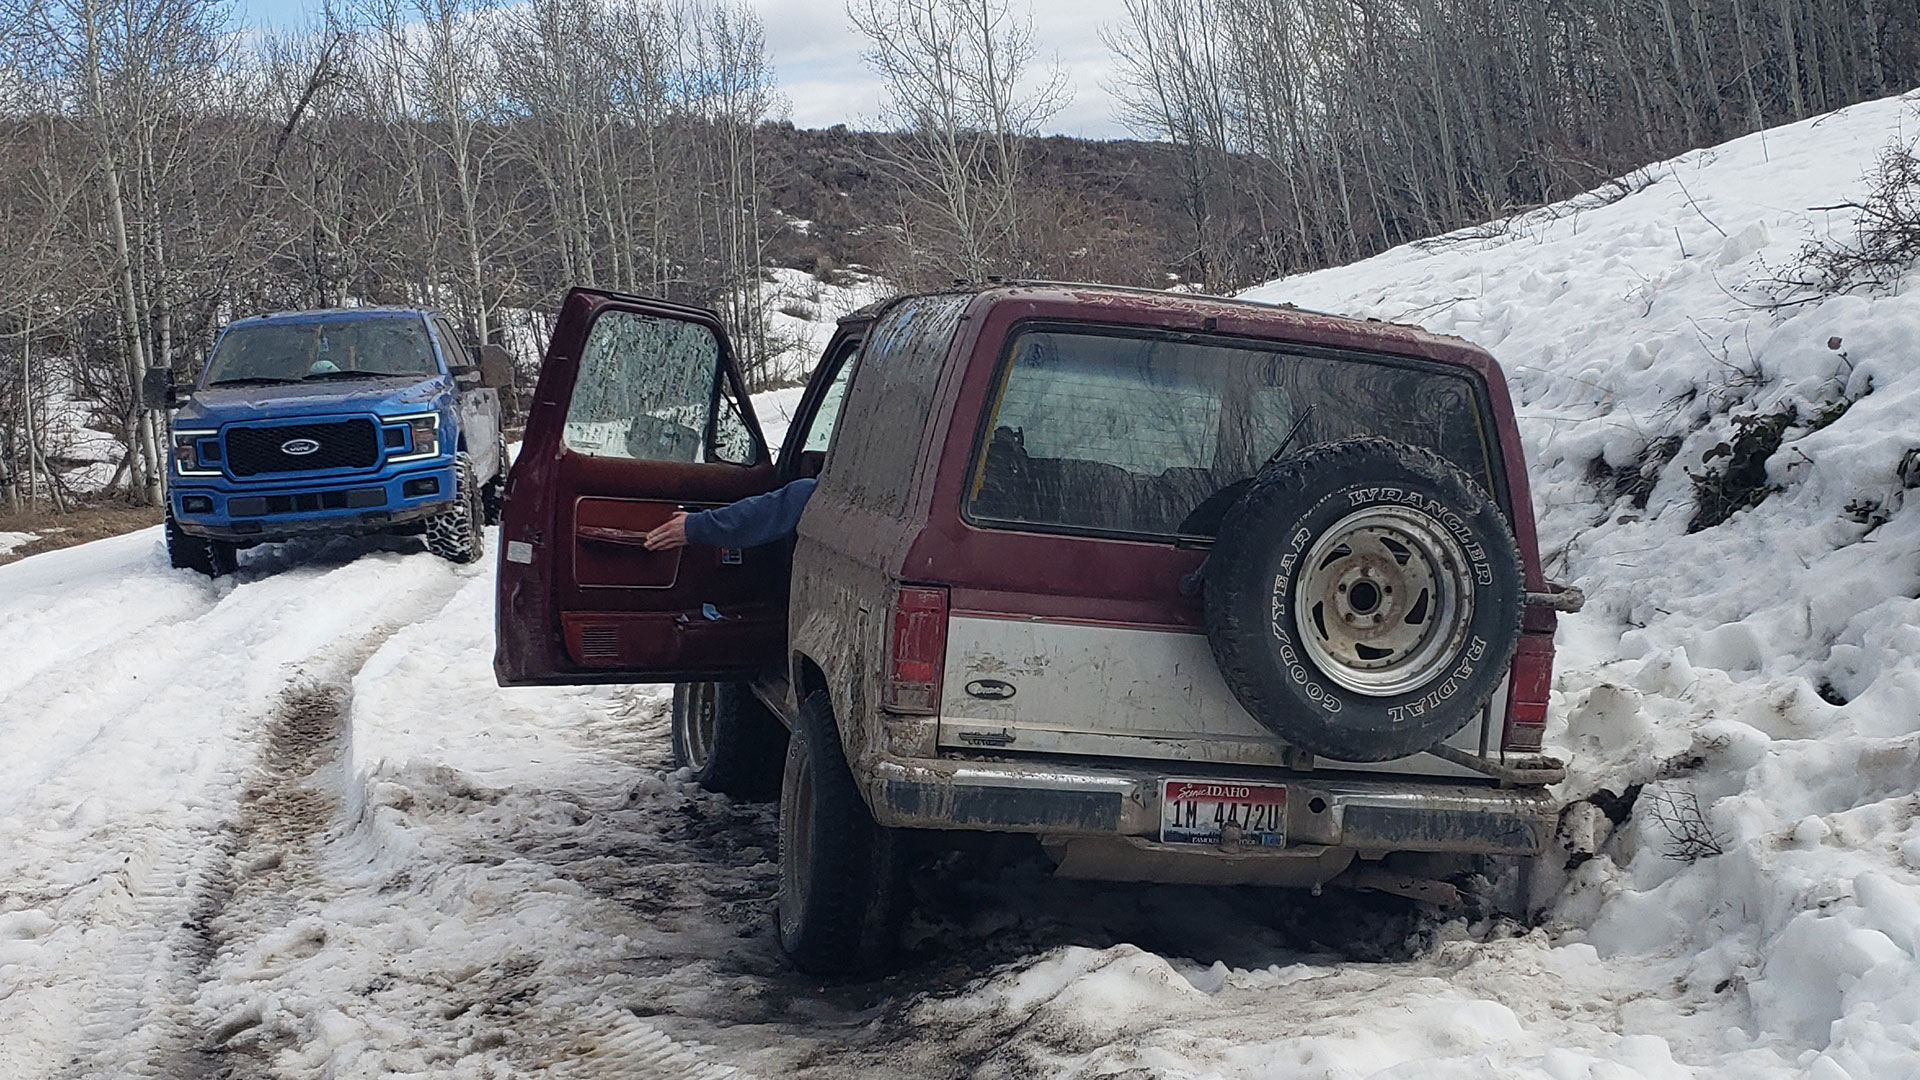 F150, slid off-road, mix of mud and snow